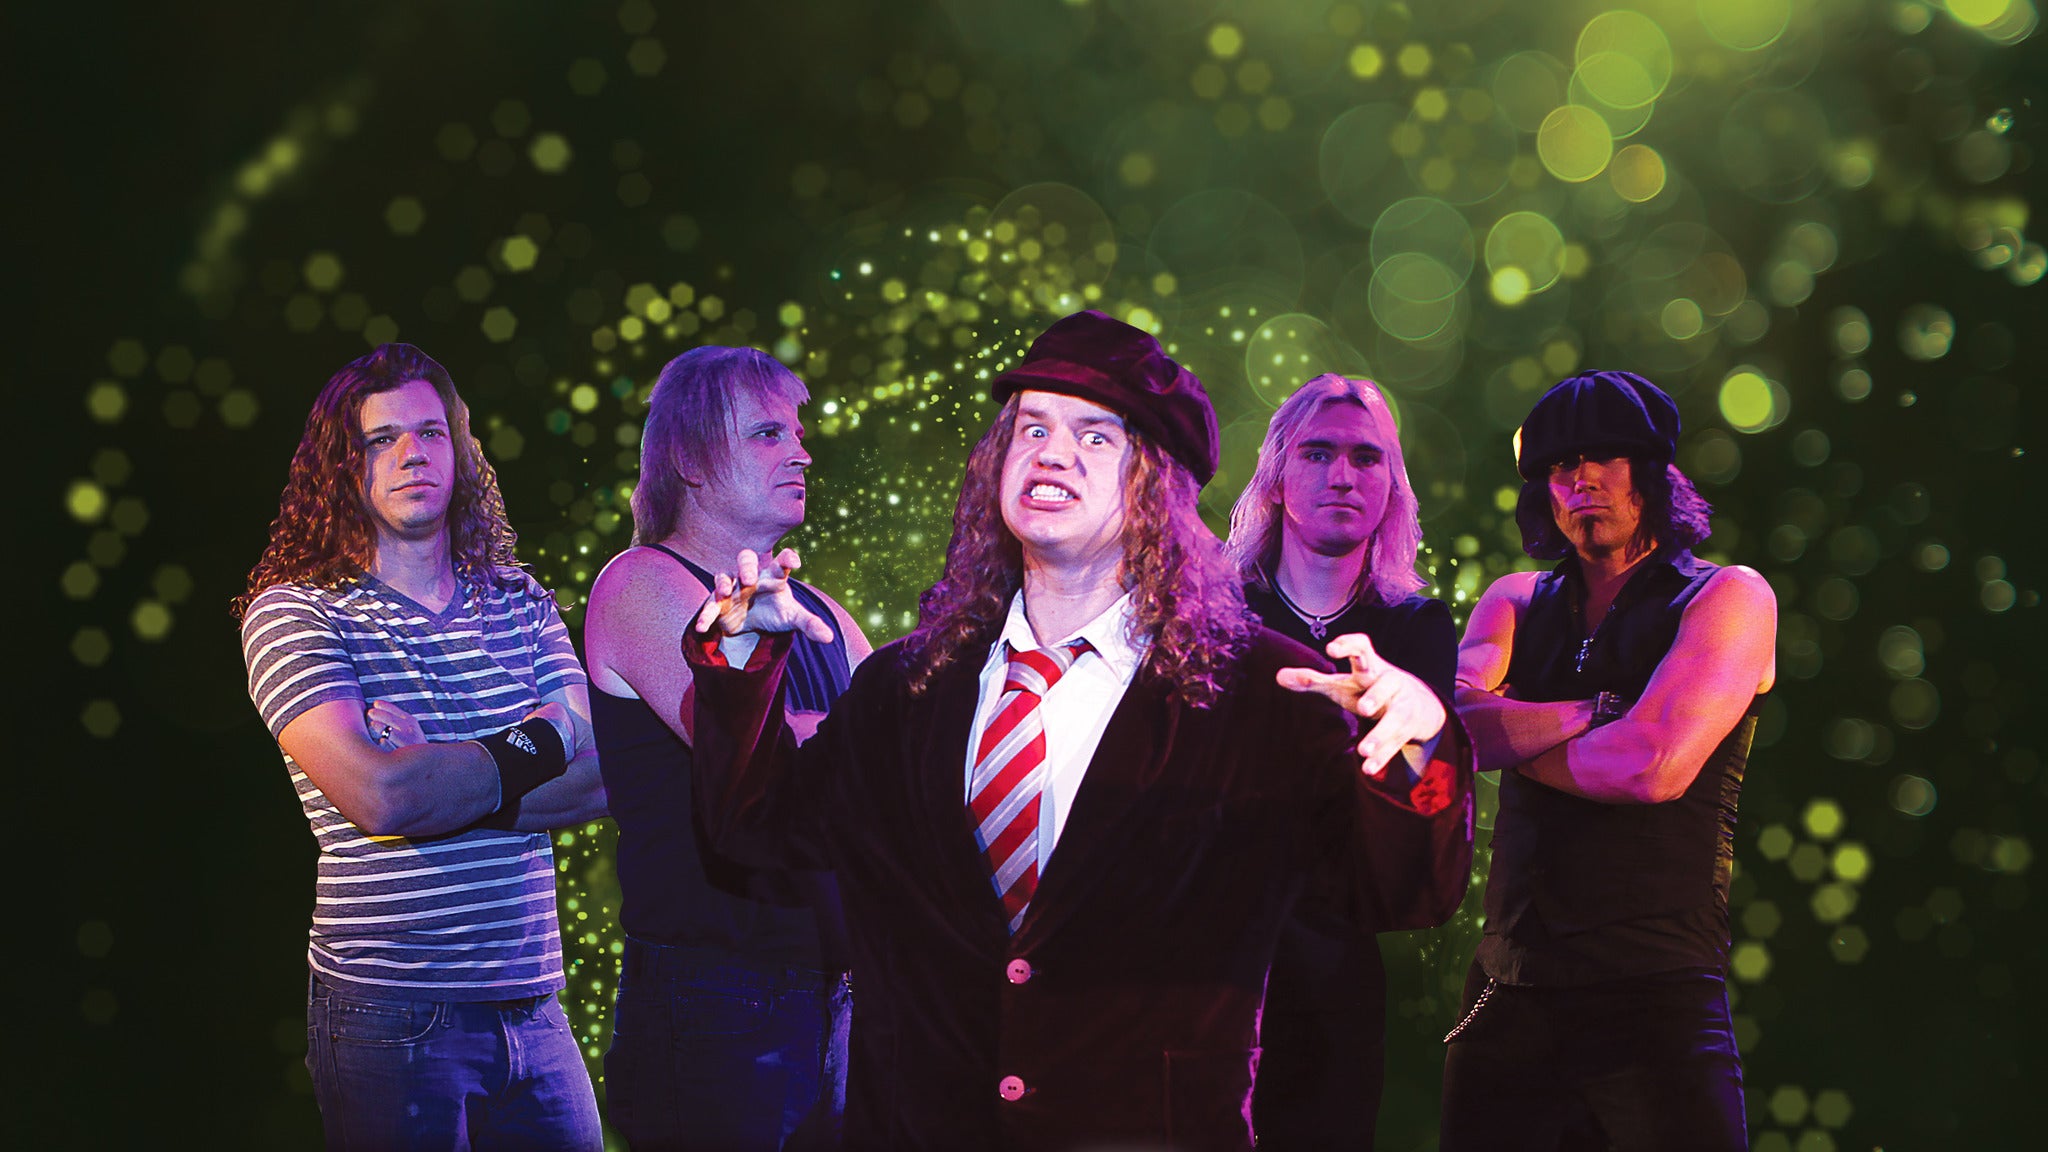 Thunderstruck - The Ultimate AC/DC Tribute Band in Detroit event information